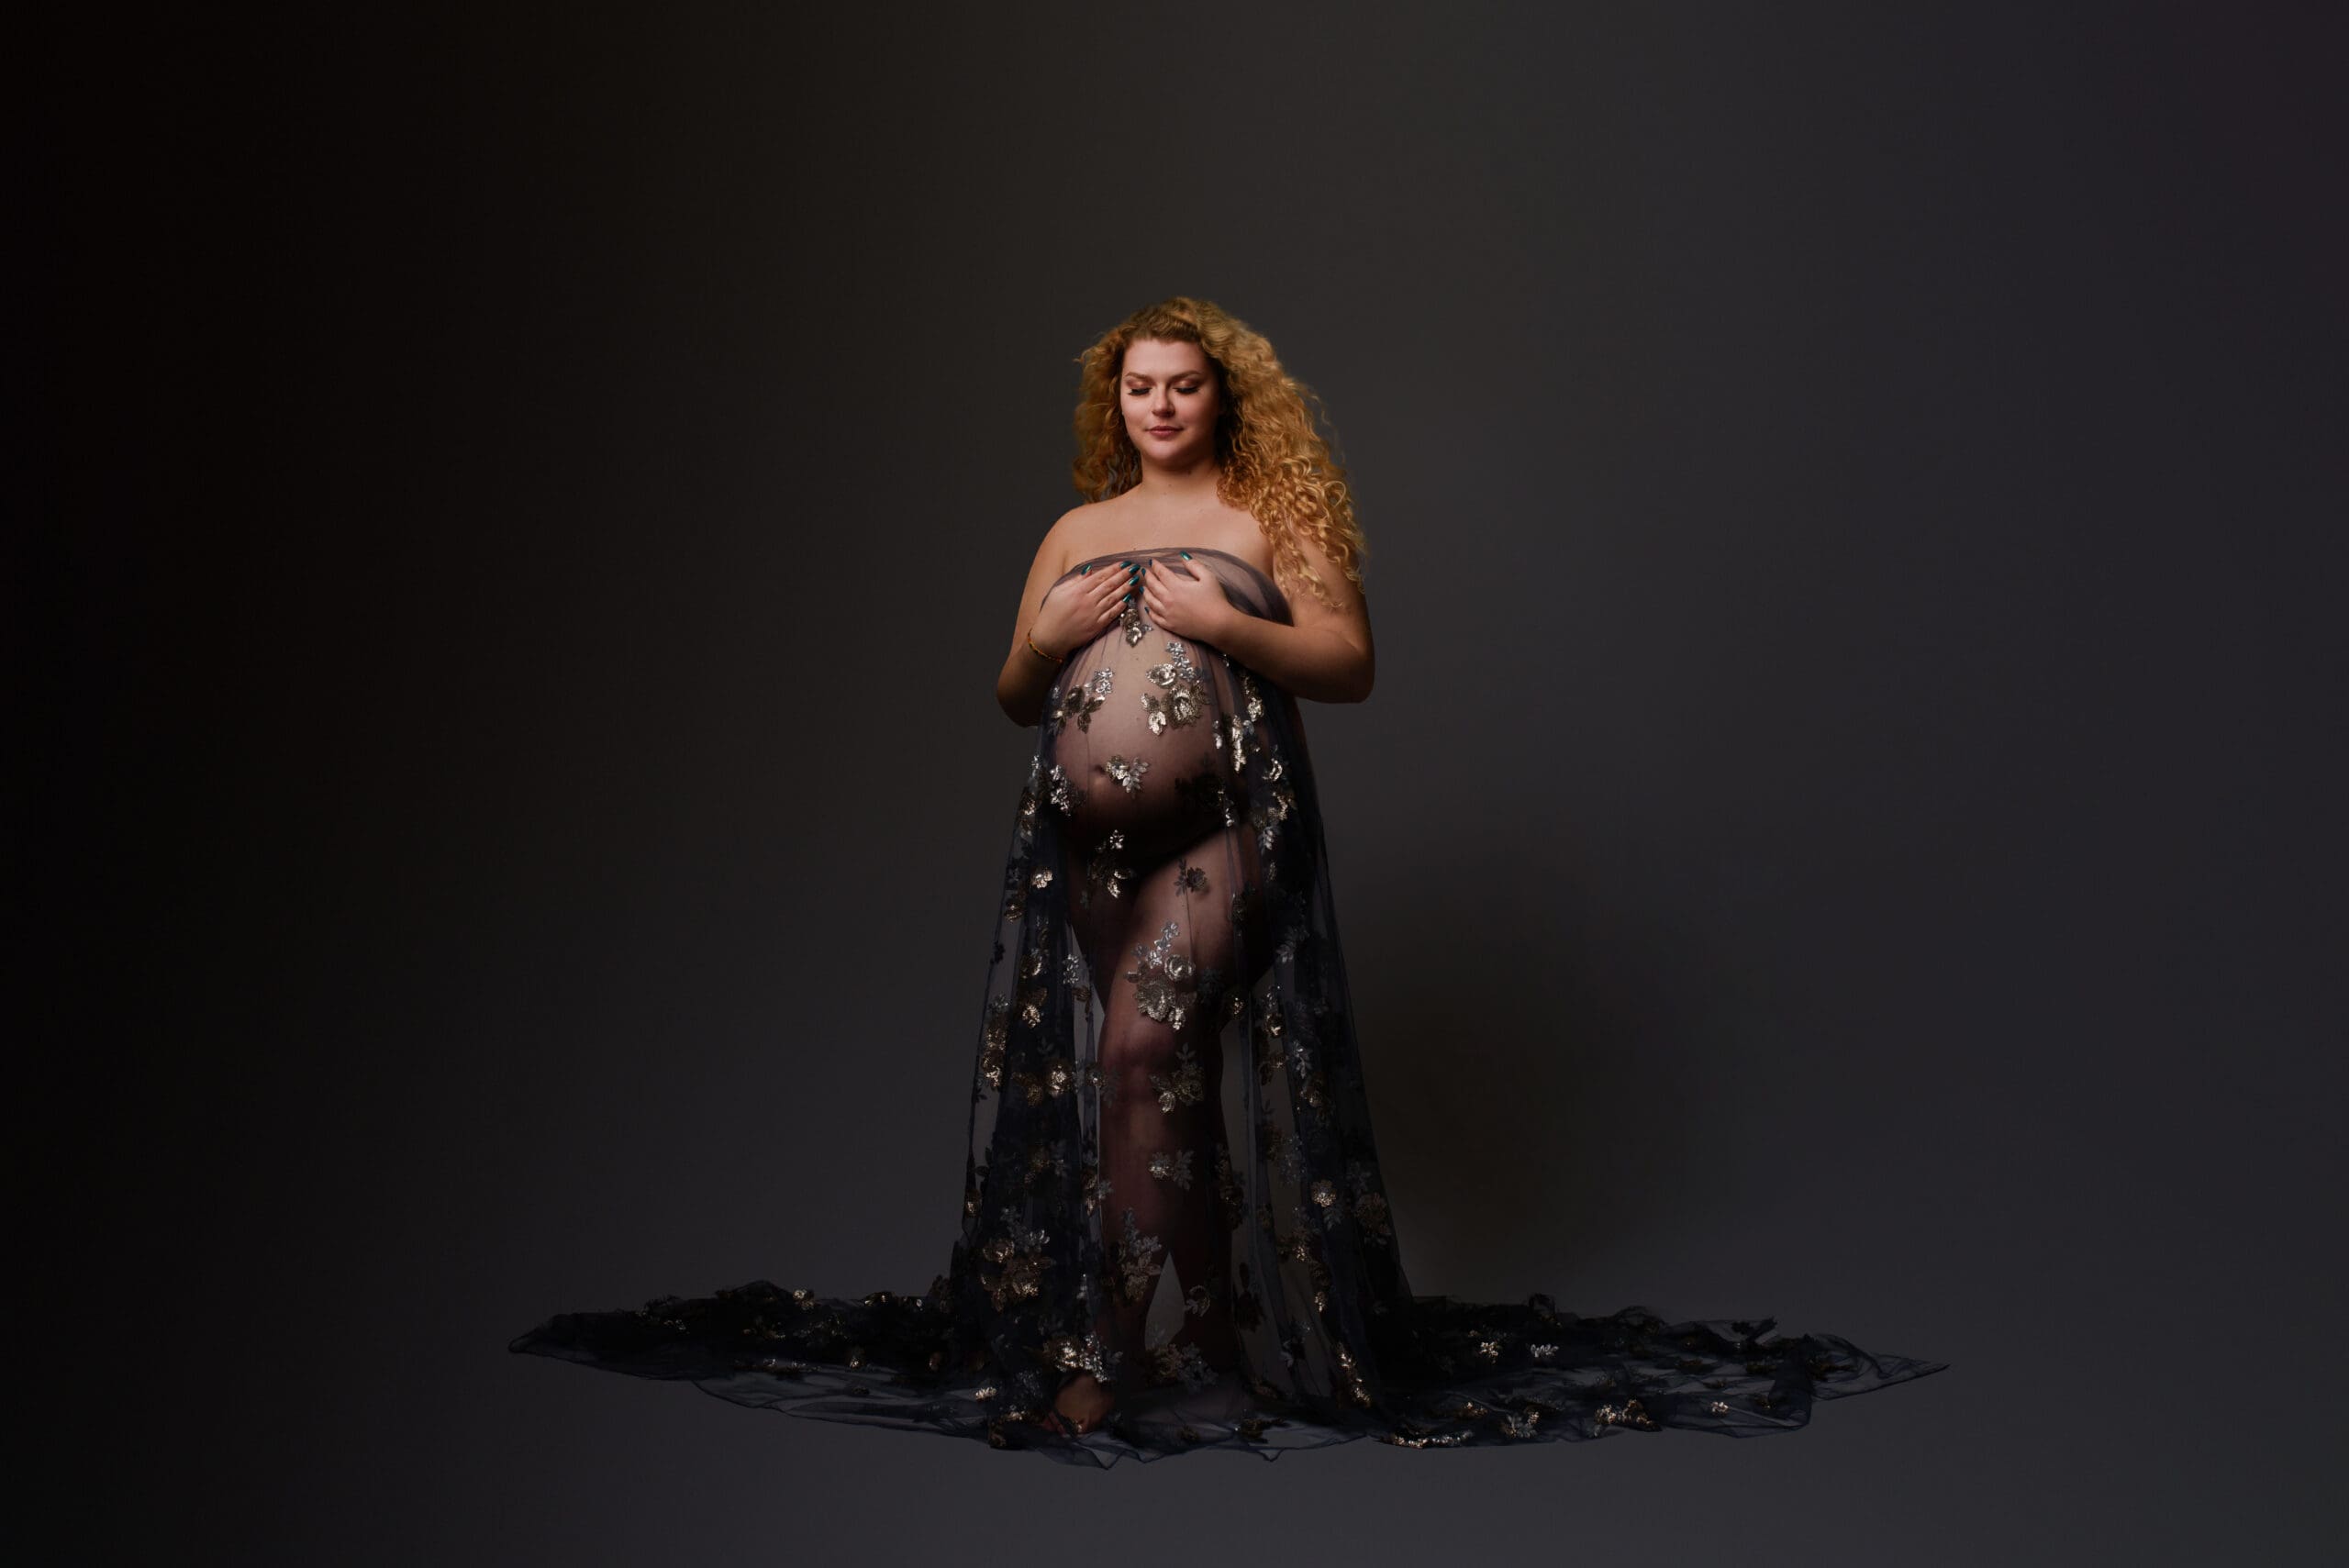 columbus ohio photo studio captures a maternity image with a woman in a sheer draping